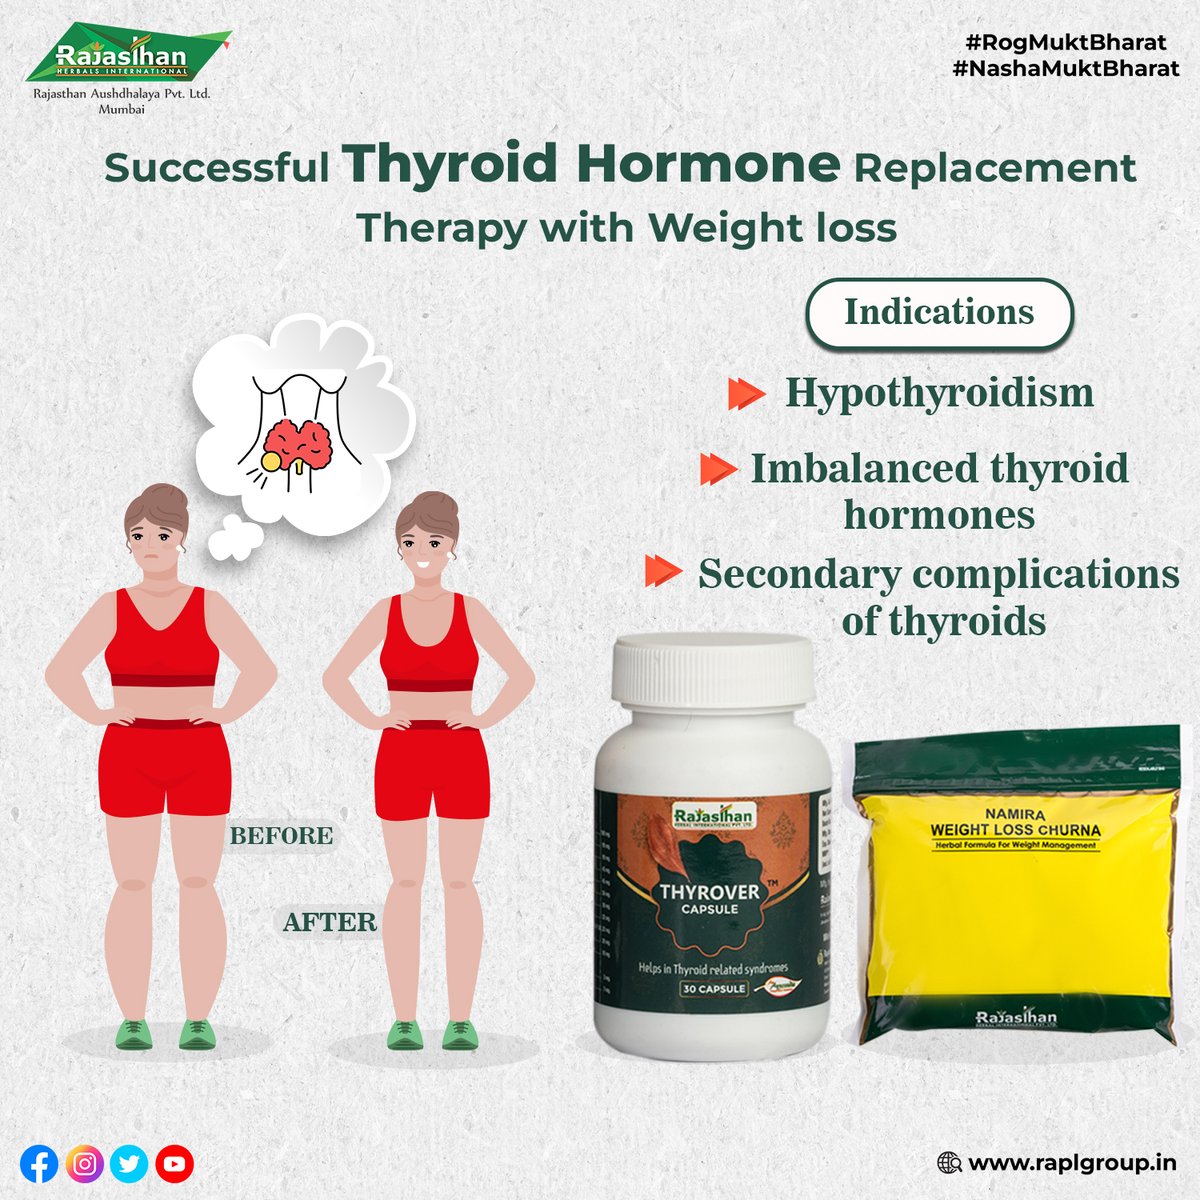 Thyroid Support & Weight Loss!

Thyrover Capsule & Namira Weight Loss Churna - A powerful combo  for thyroid management ✨

#thyroidhealth #weightmanagement #naturalsolutions #healthyweightloss #thyroidawareness #thyroidproblems #weightloss #weightlossjourney